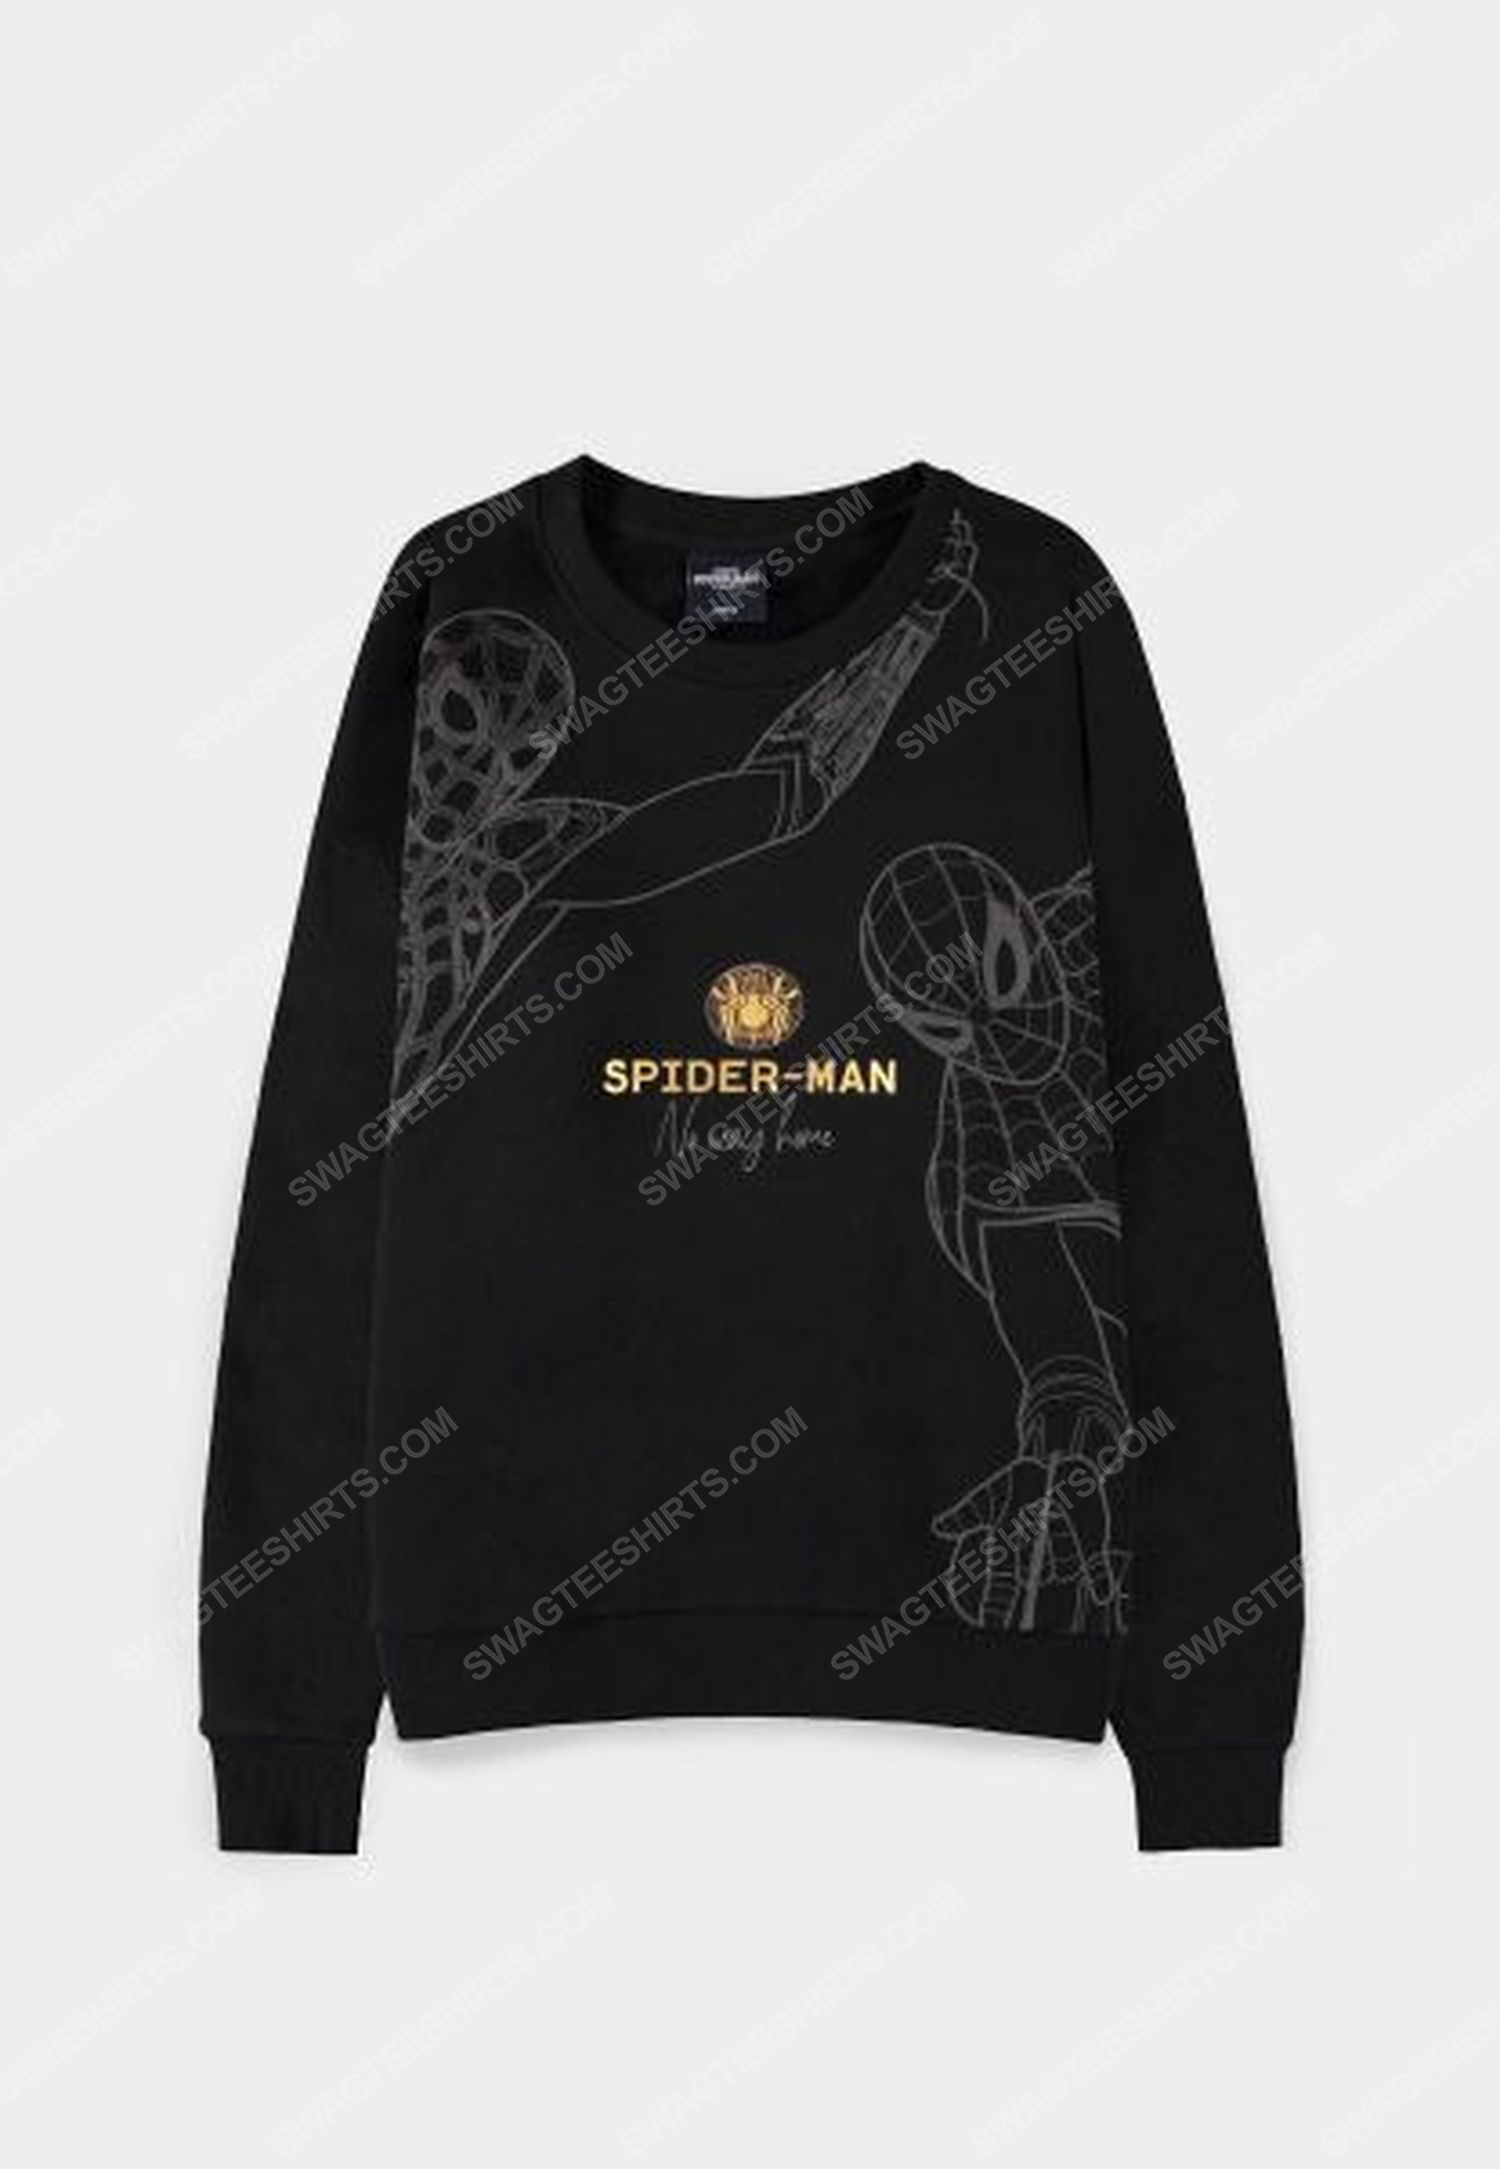 Spider-man no way home full print ugly christmas sweater 2 - Copy (2)